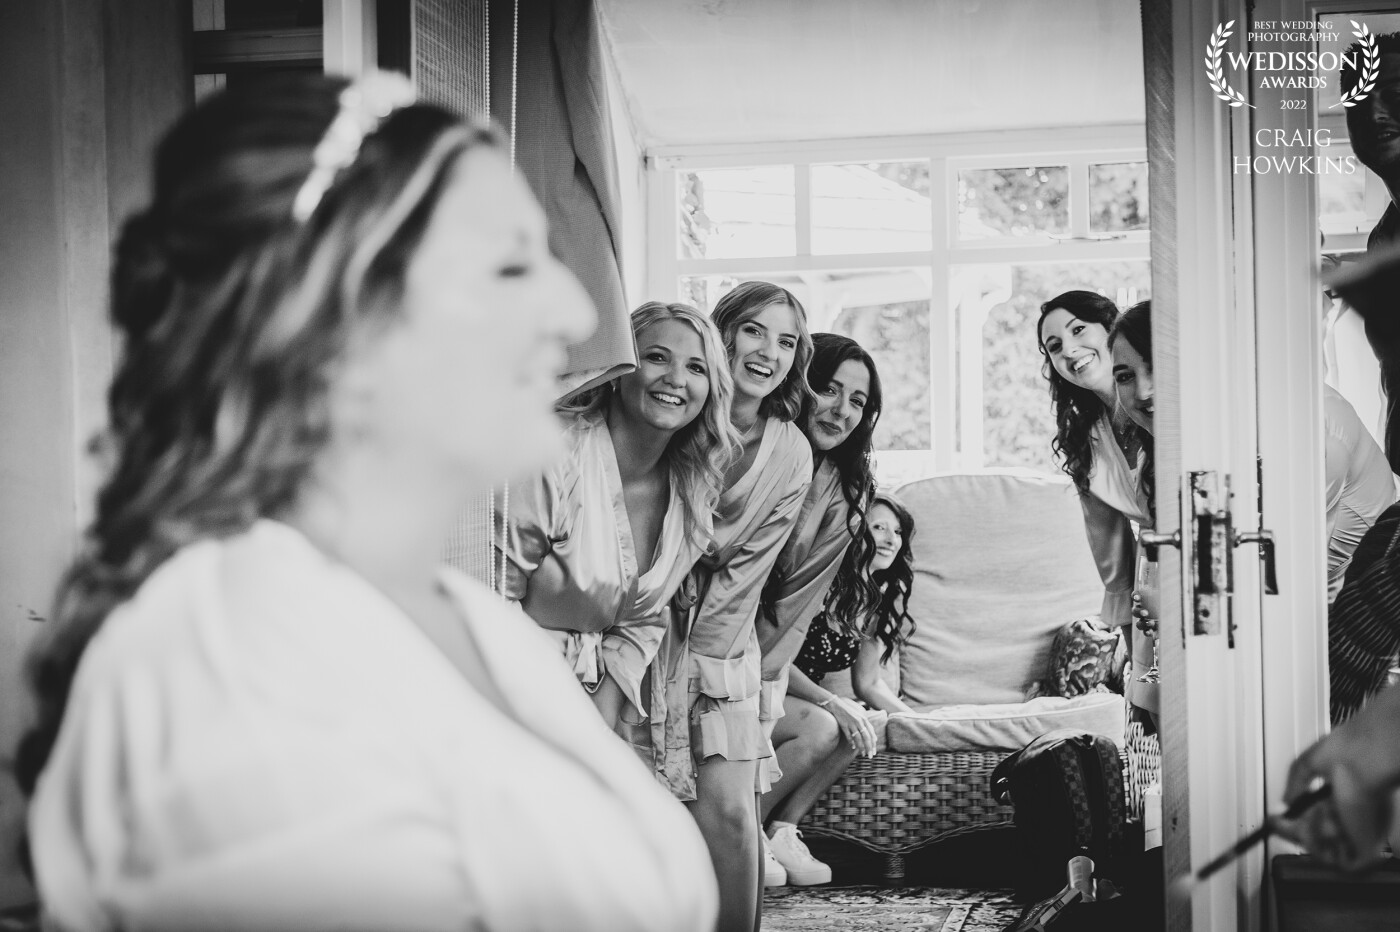 I love it when a moment just happens naturally. This shot was not staged. .As I was doing the bridal prep shoot, the bridesmaids wanted a quick look at the bride so they all just gathered around and made this shot work. That's what I call being in the right place at the right time.